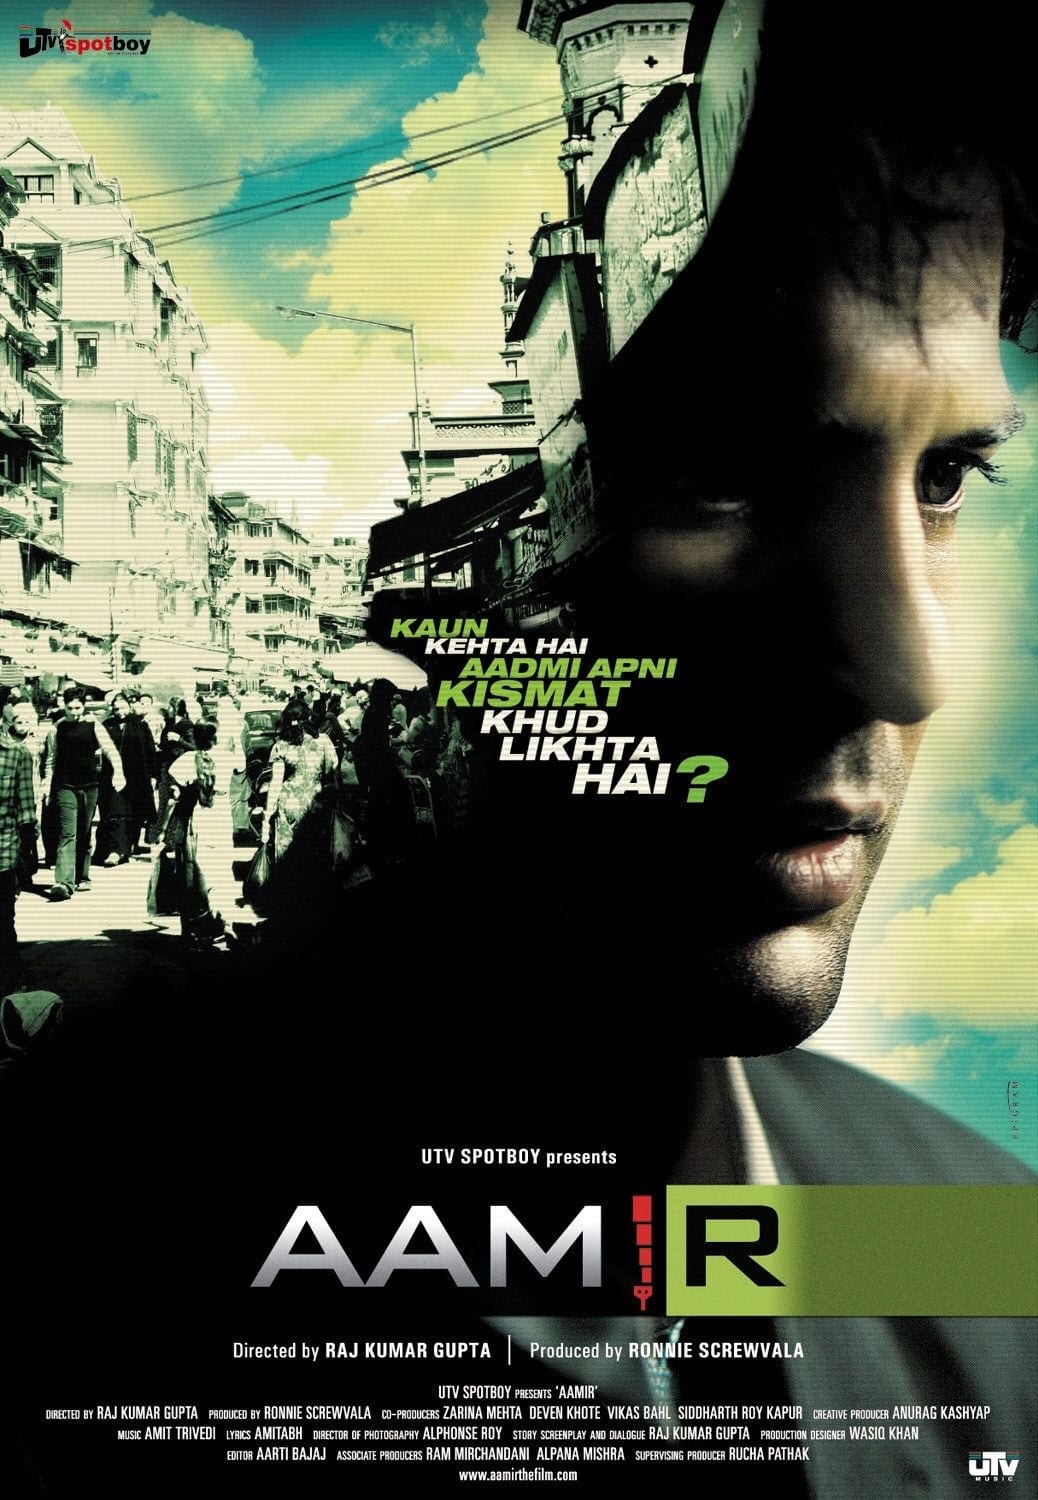 Poster for the movie "Aamir"